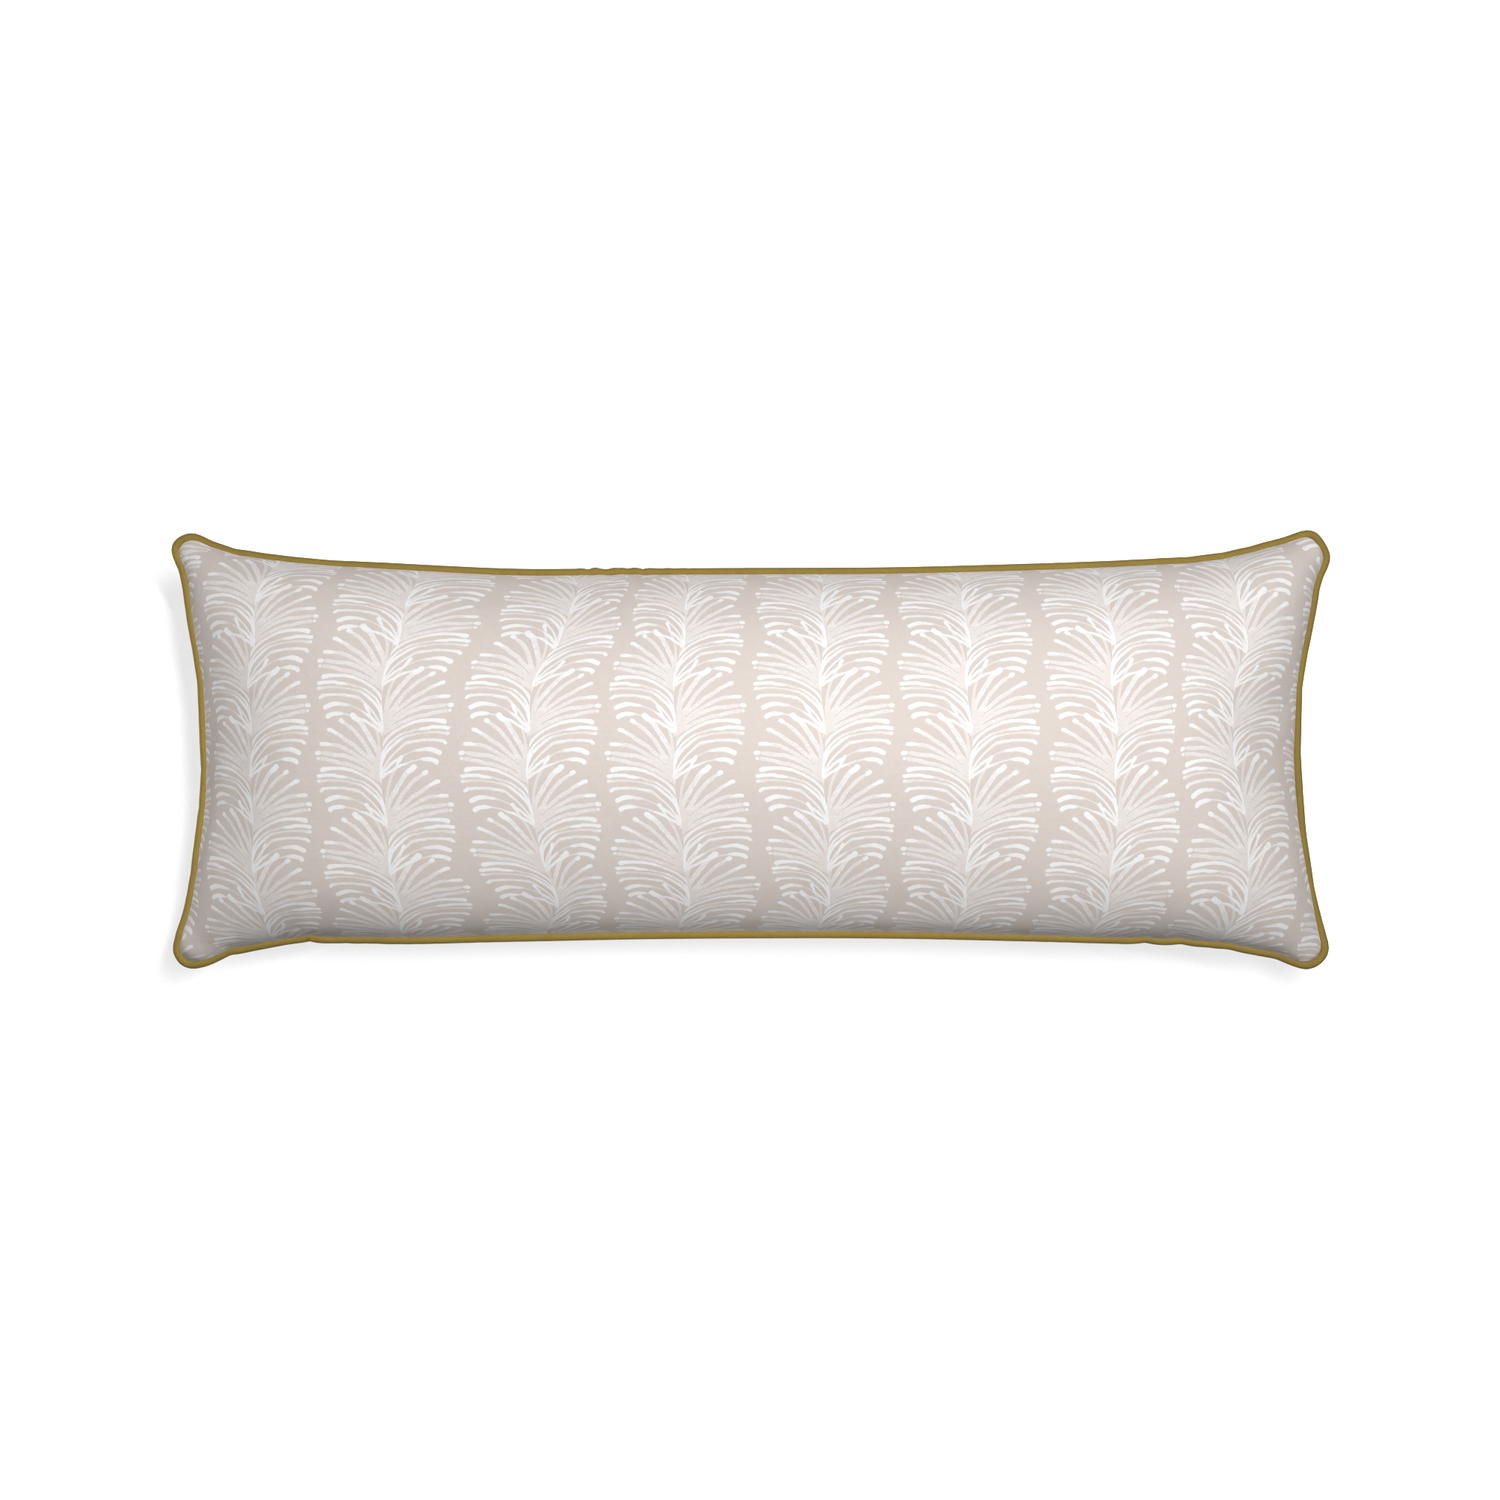 Xl-lumbar emma sand custom sand colored botanical stripepillow with c piping on white background